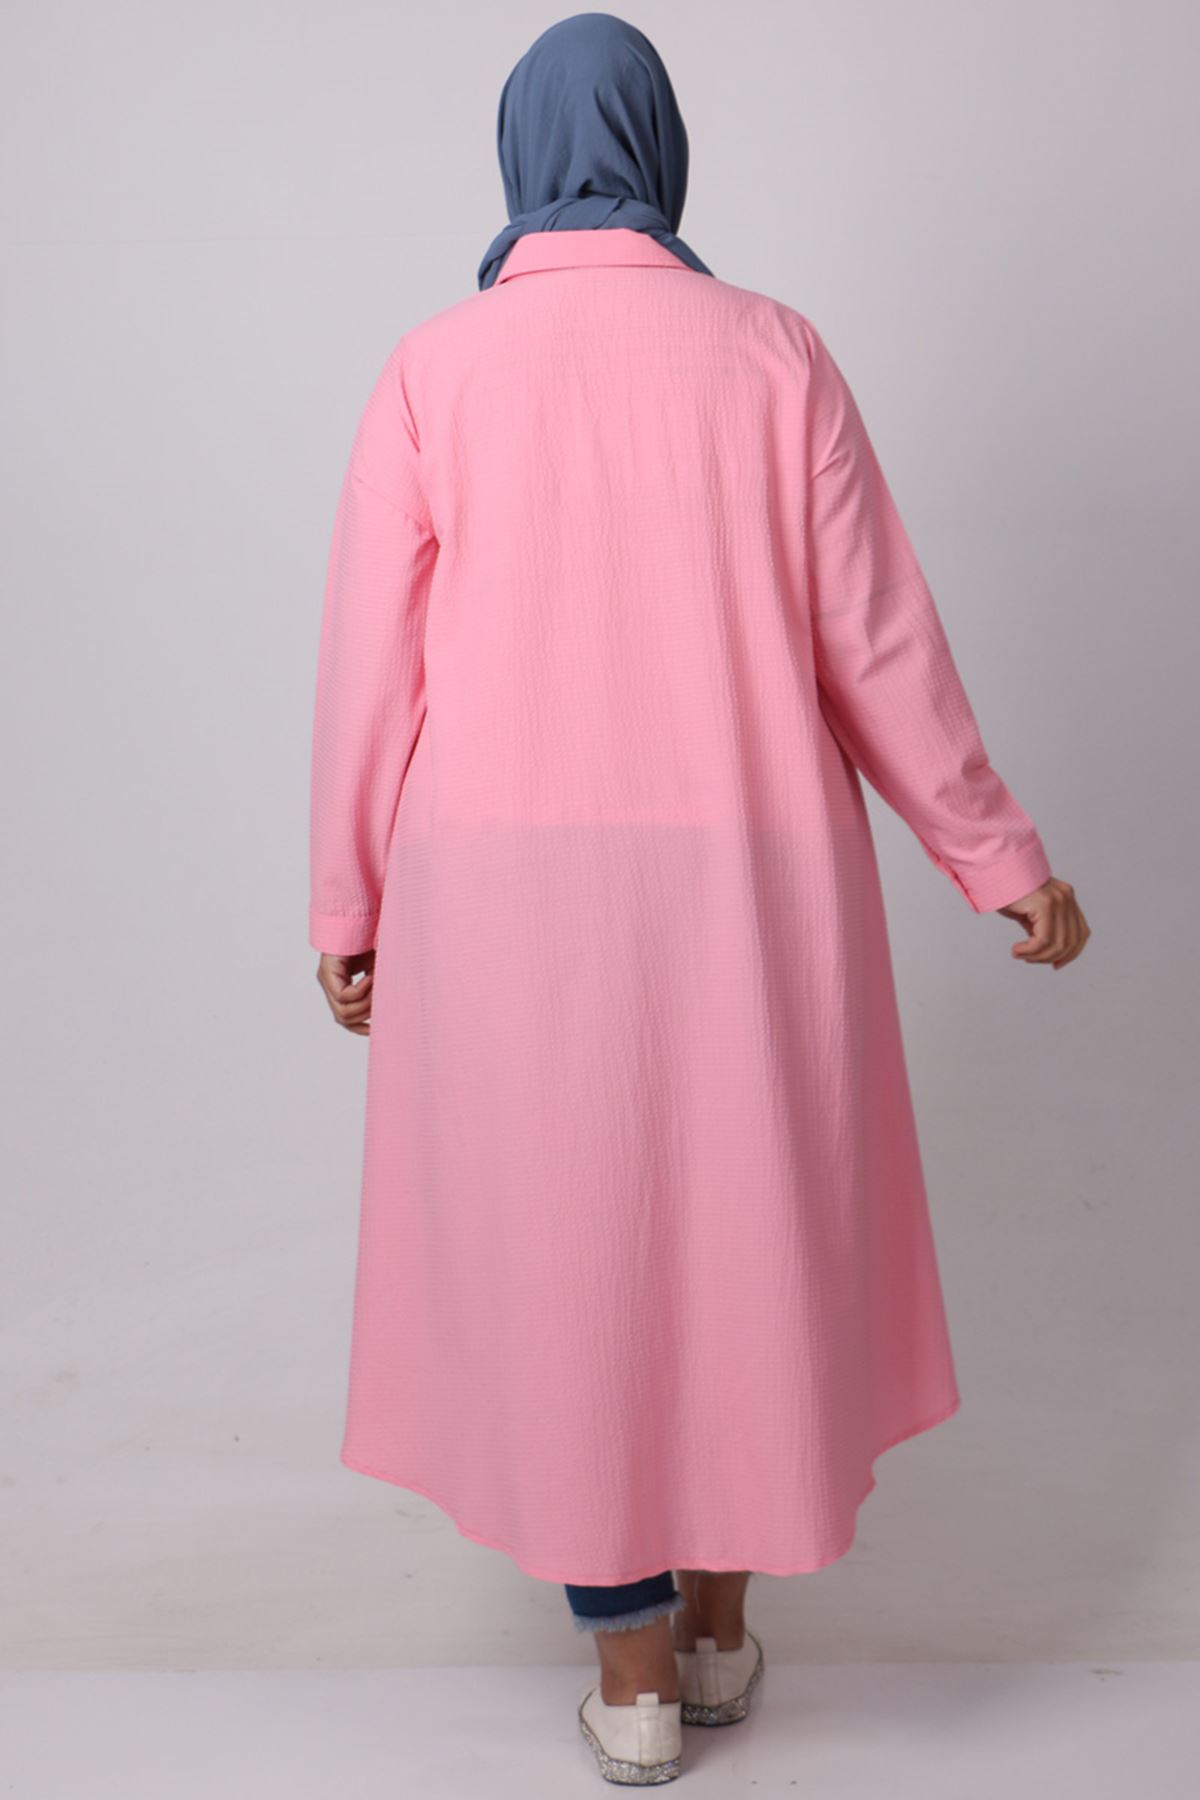 38042 Large Size Mevlana Goffre Tunic - Pink